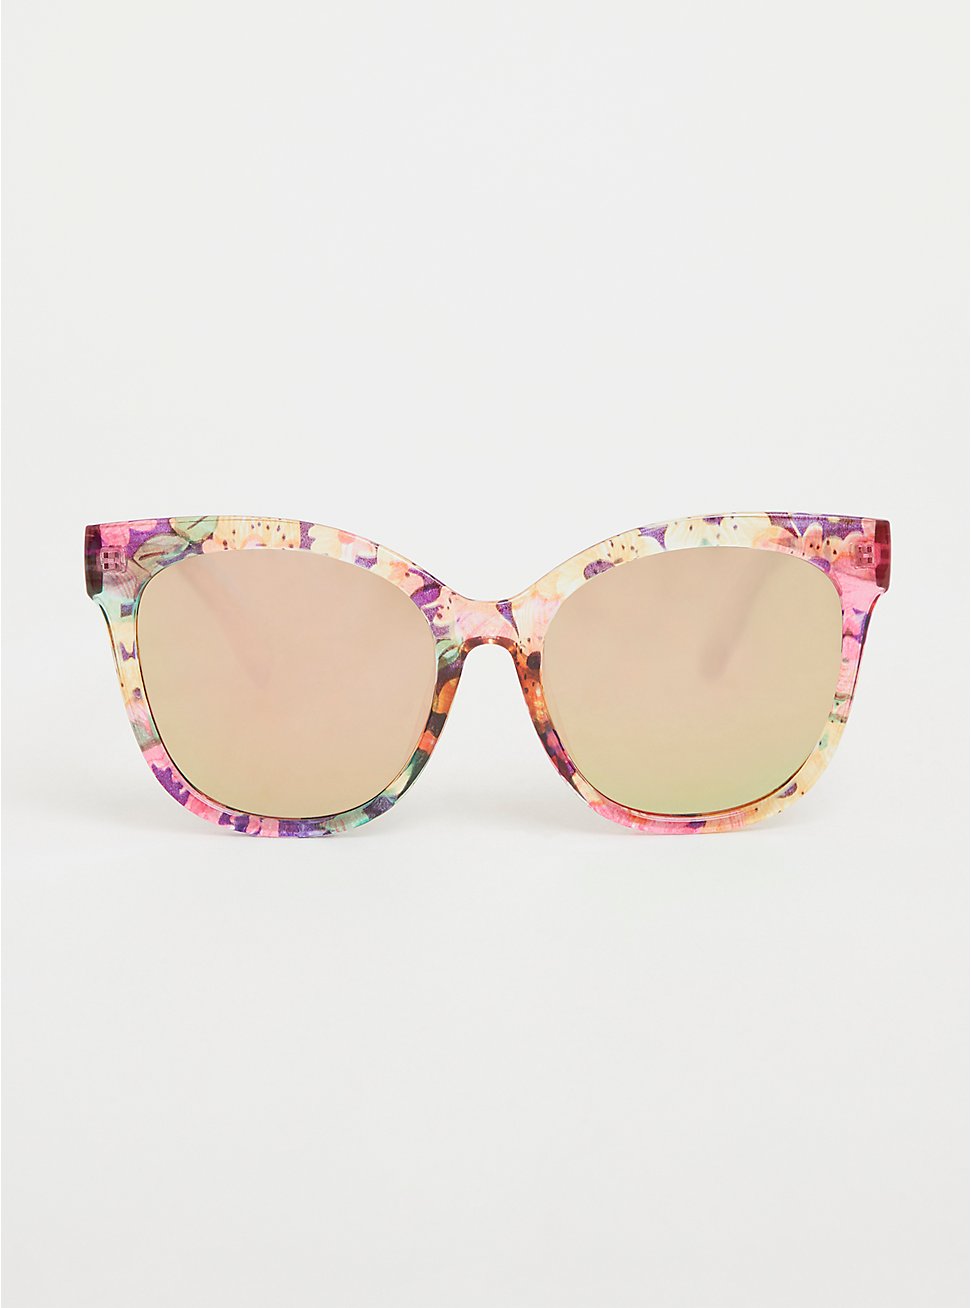 Patterned Cateye Sunglass, FLORAL, hi-res